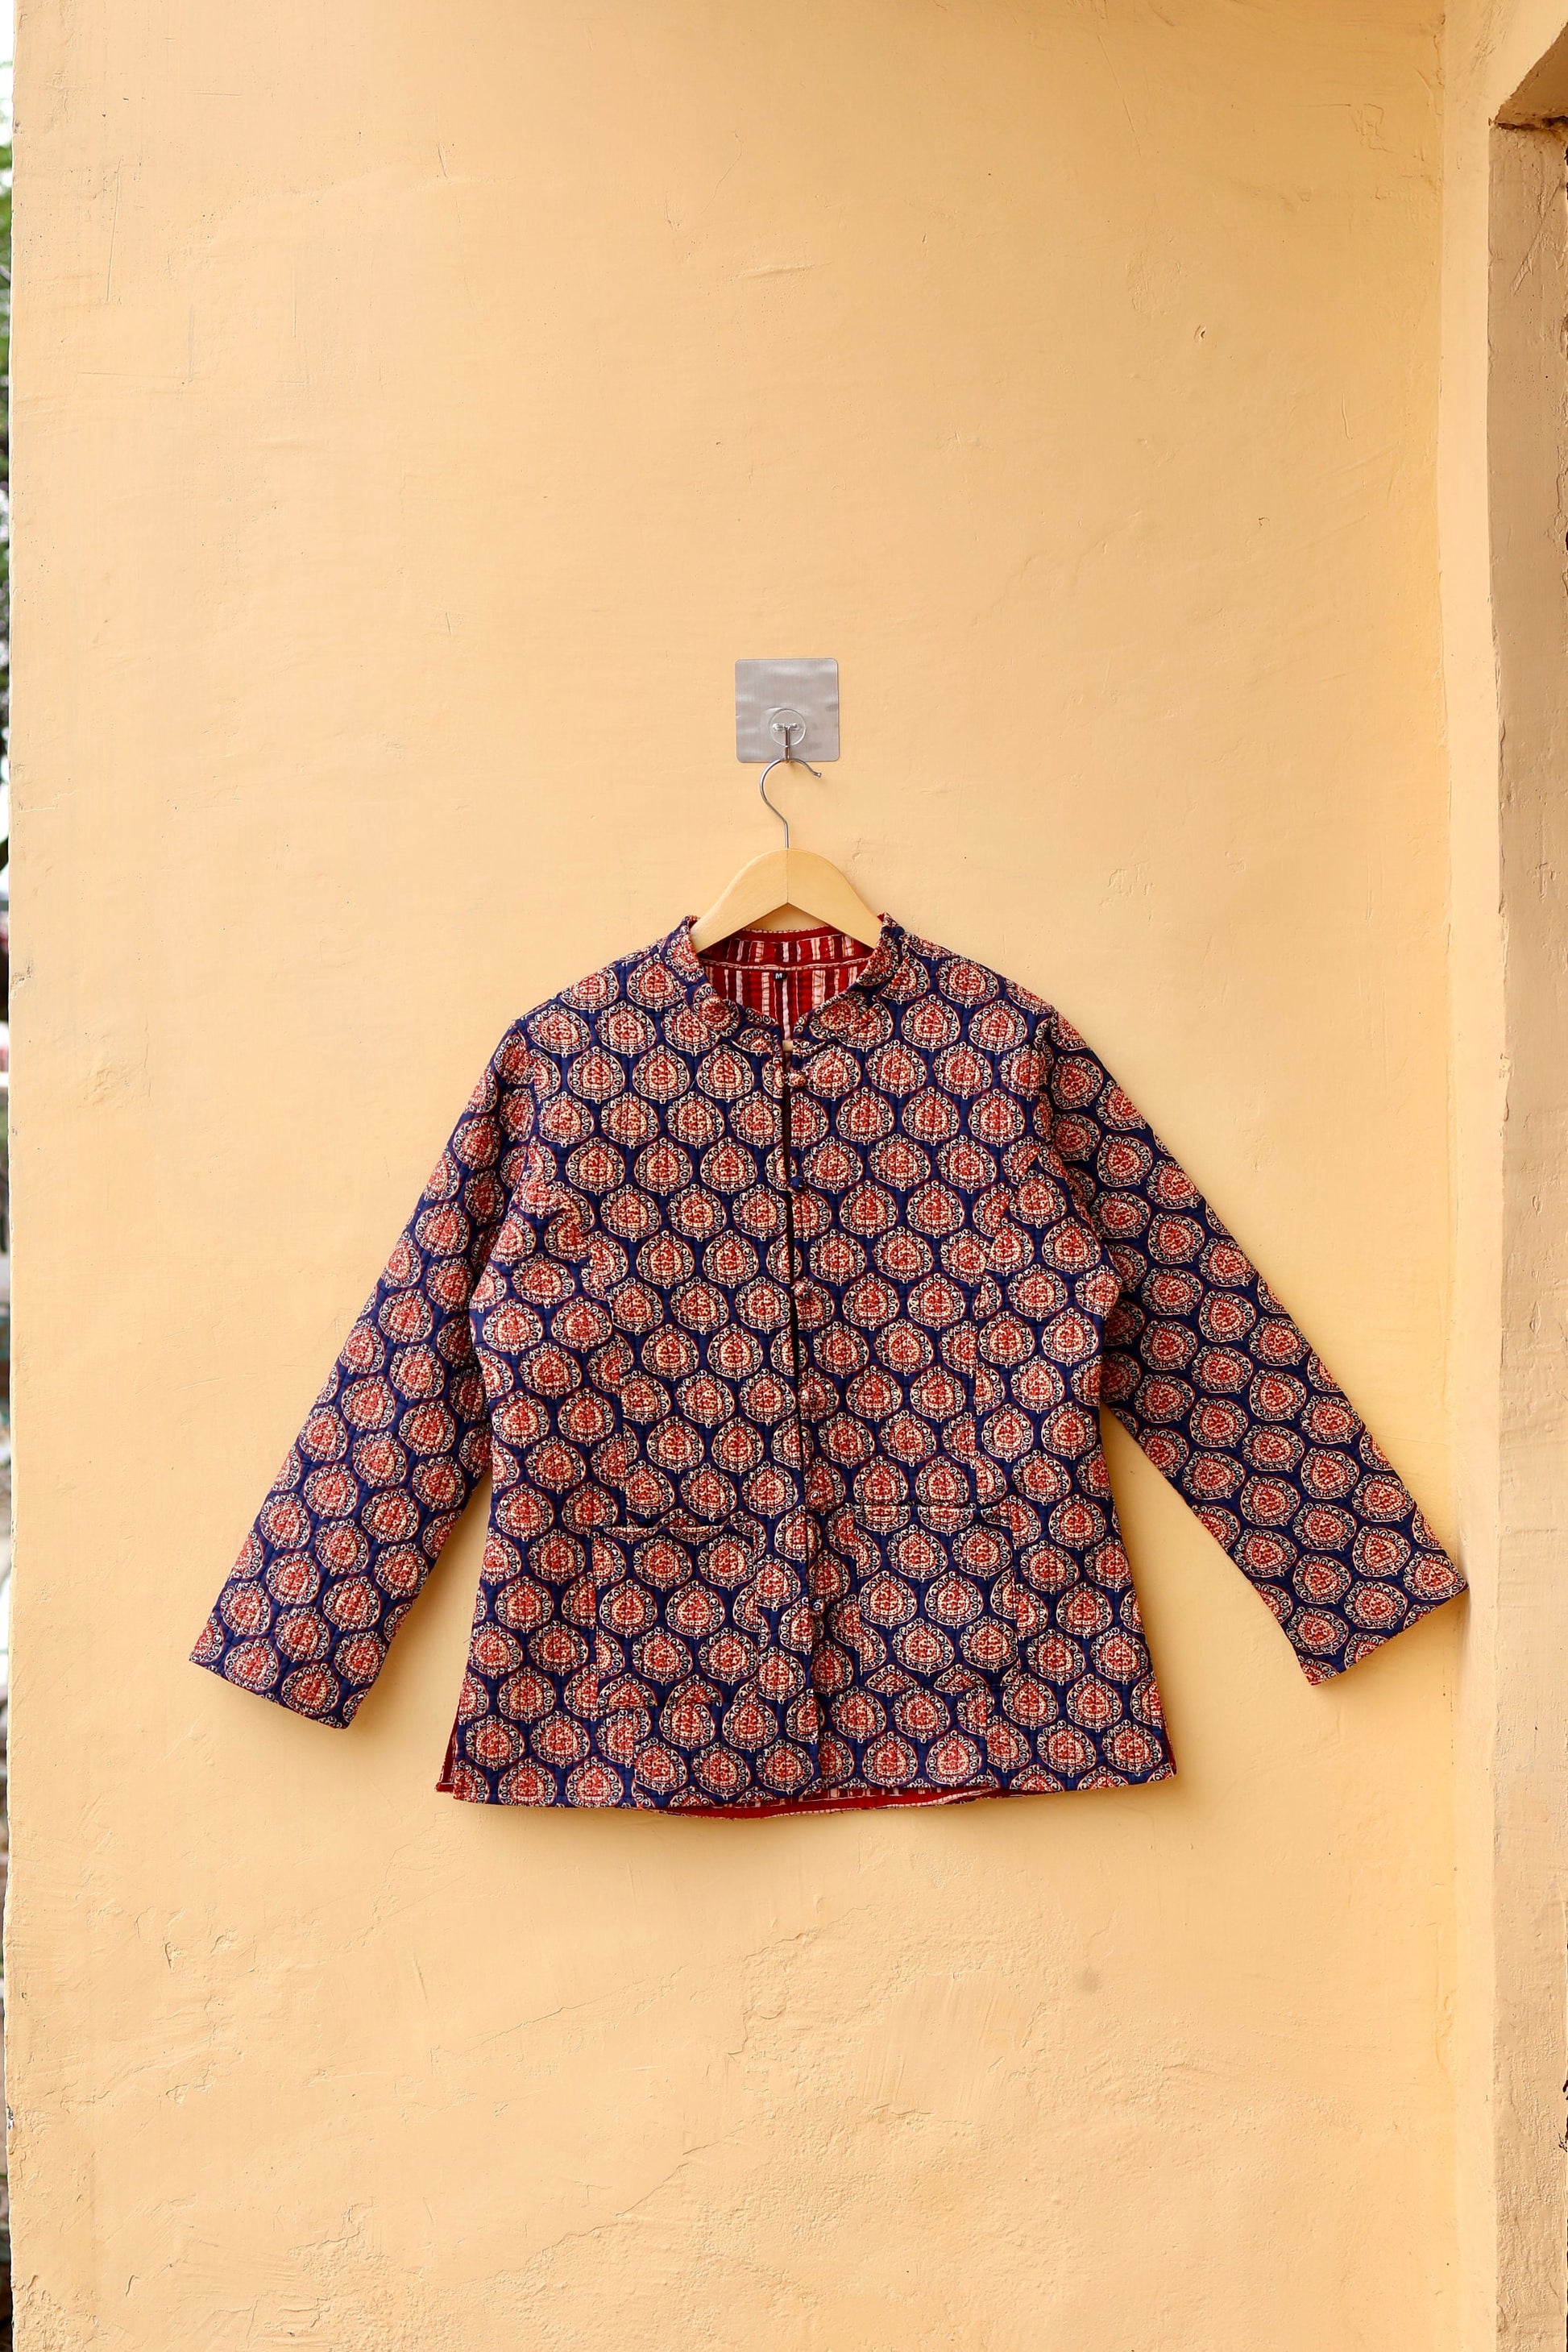 Kantha Quilted Cotton Jacket Stylish Blue & Beige Floral Women's Coat, Indian Handmade Reversible Waistcoat for Her